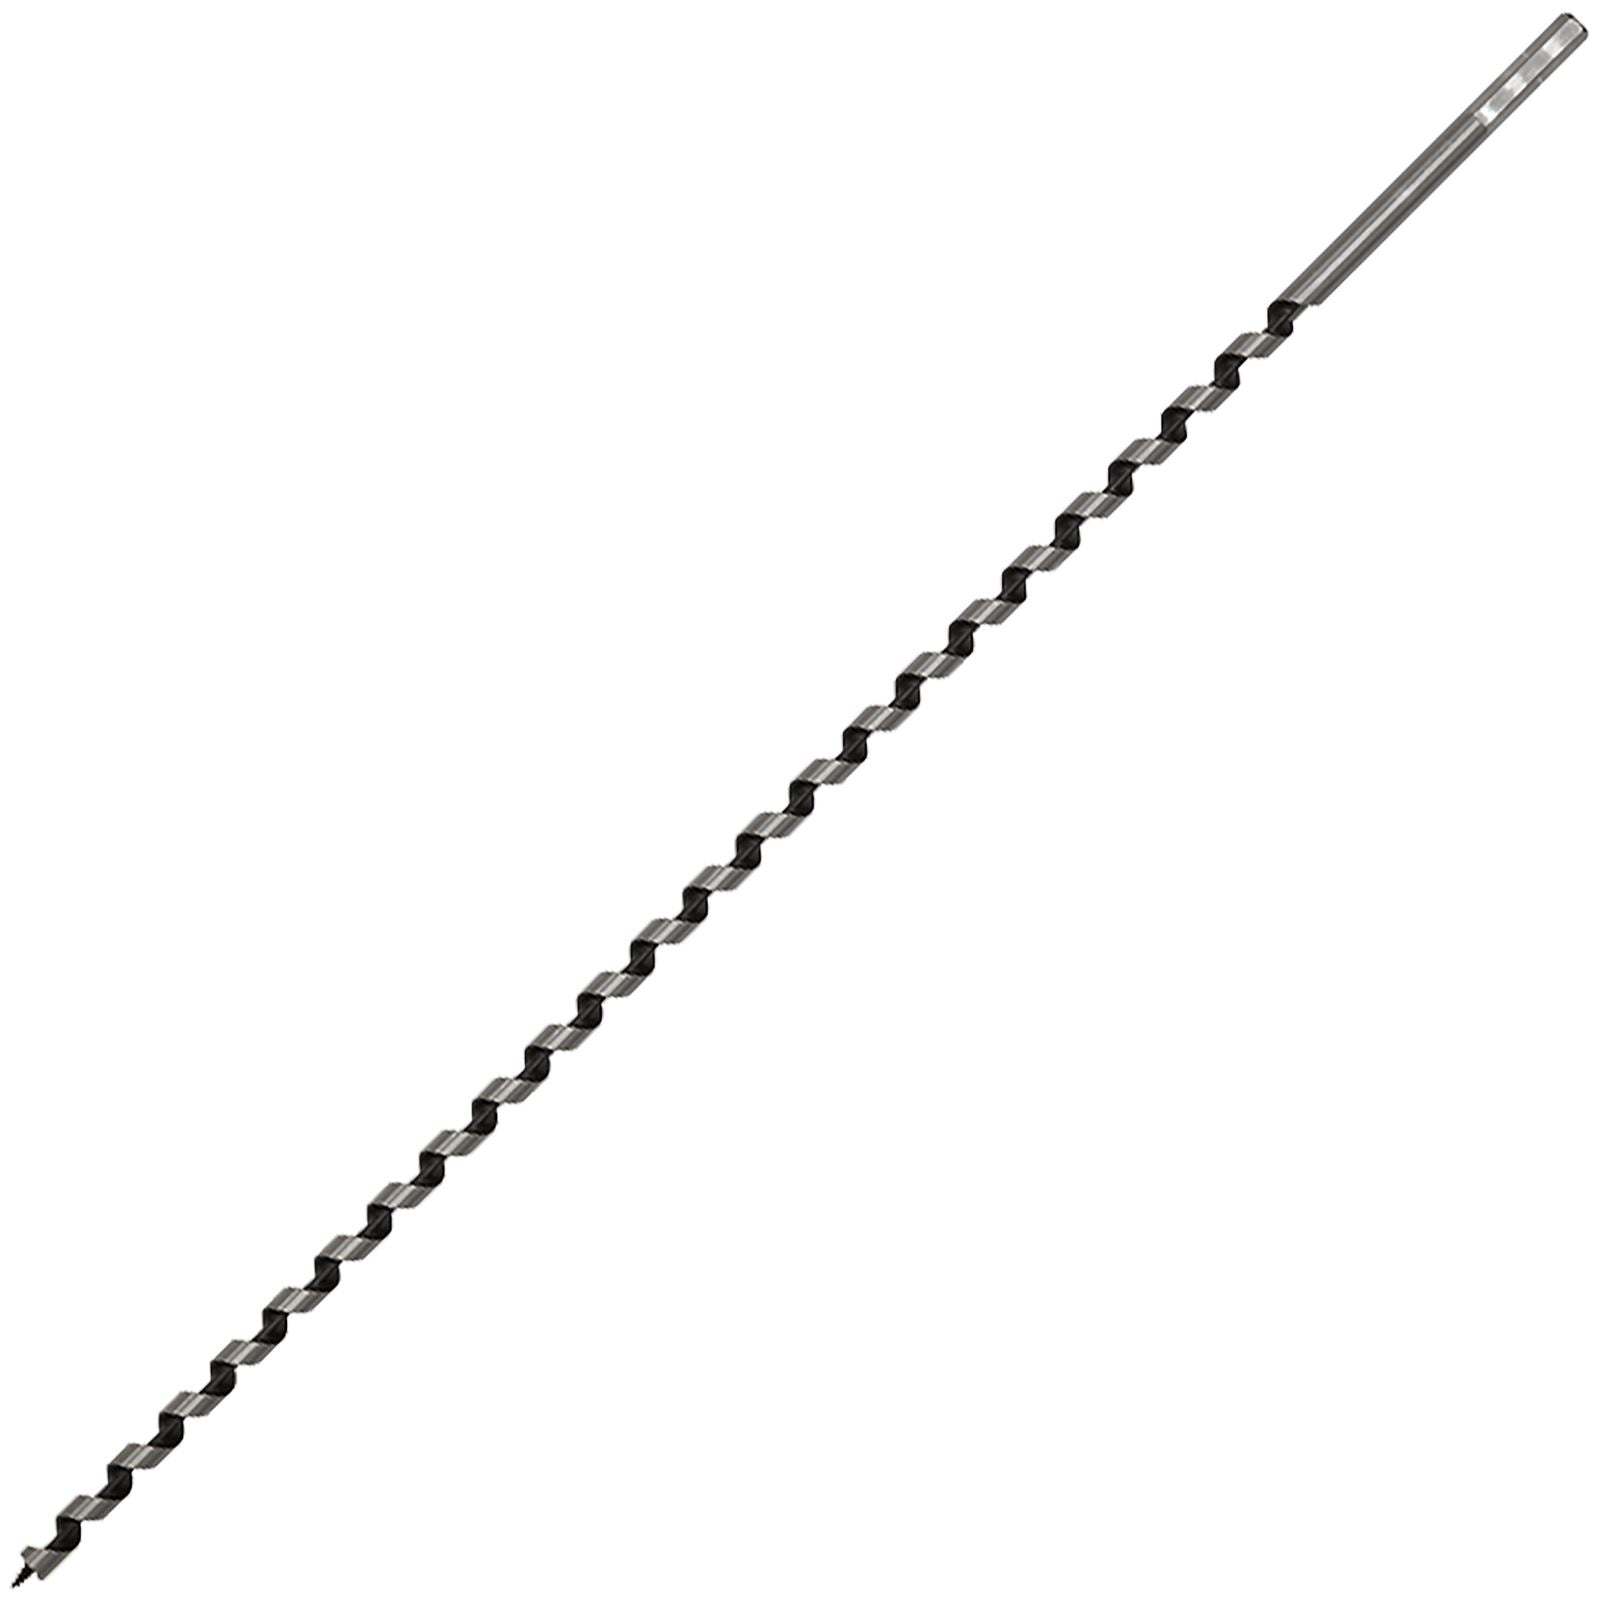 Worksafe by Sealey Auger Wood Drill Bit 10mm x 600mm